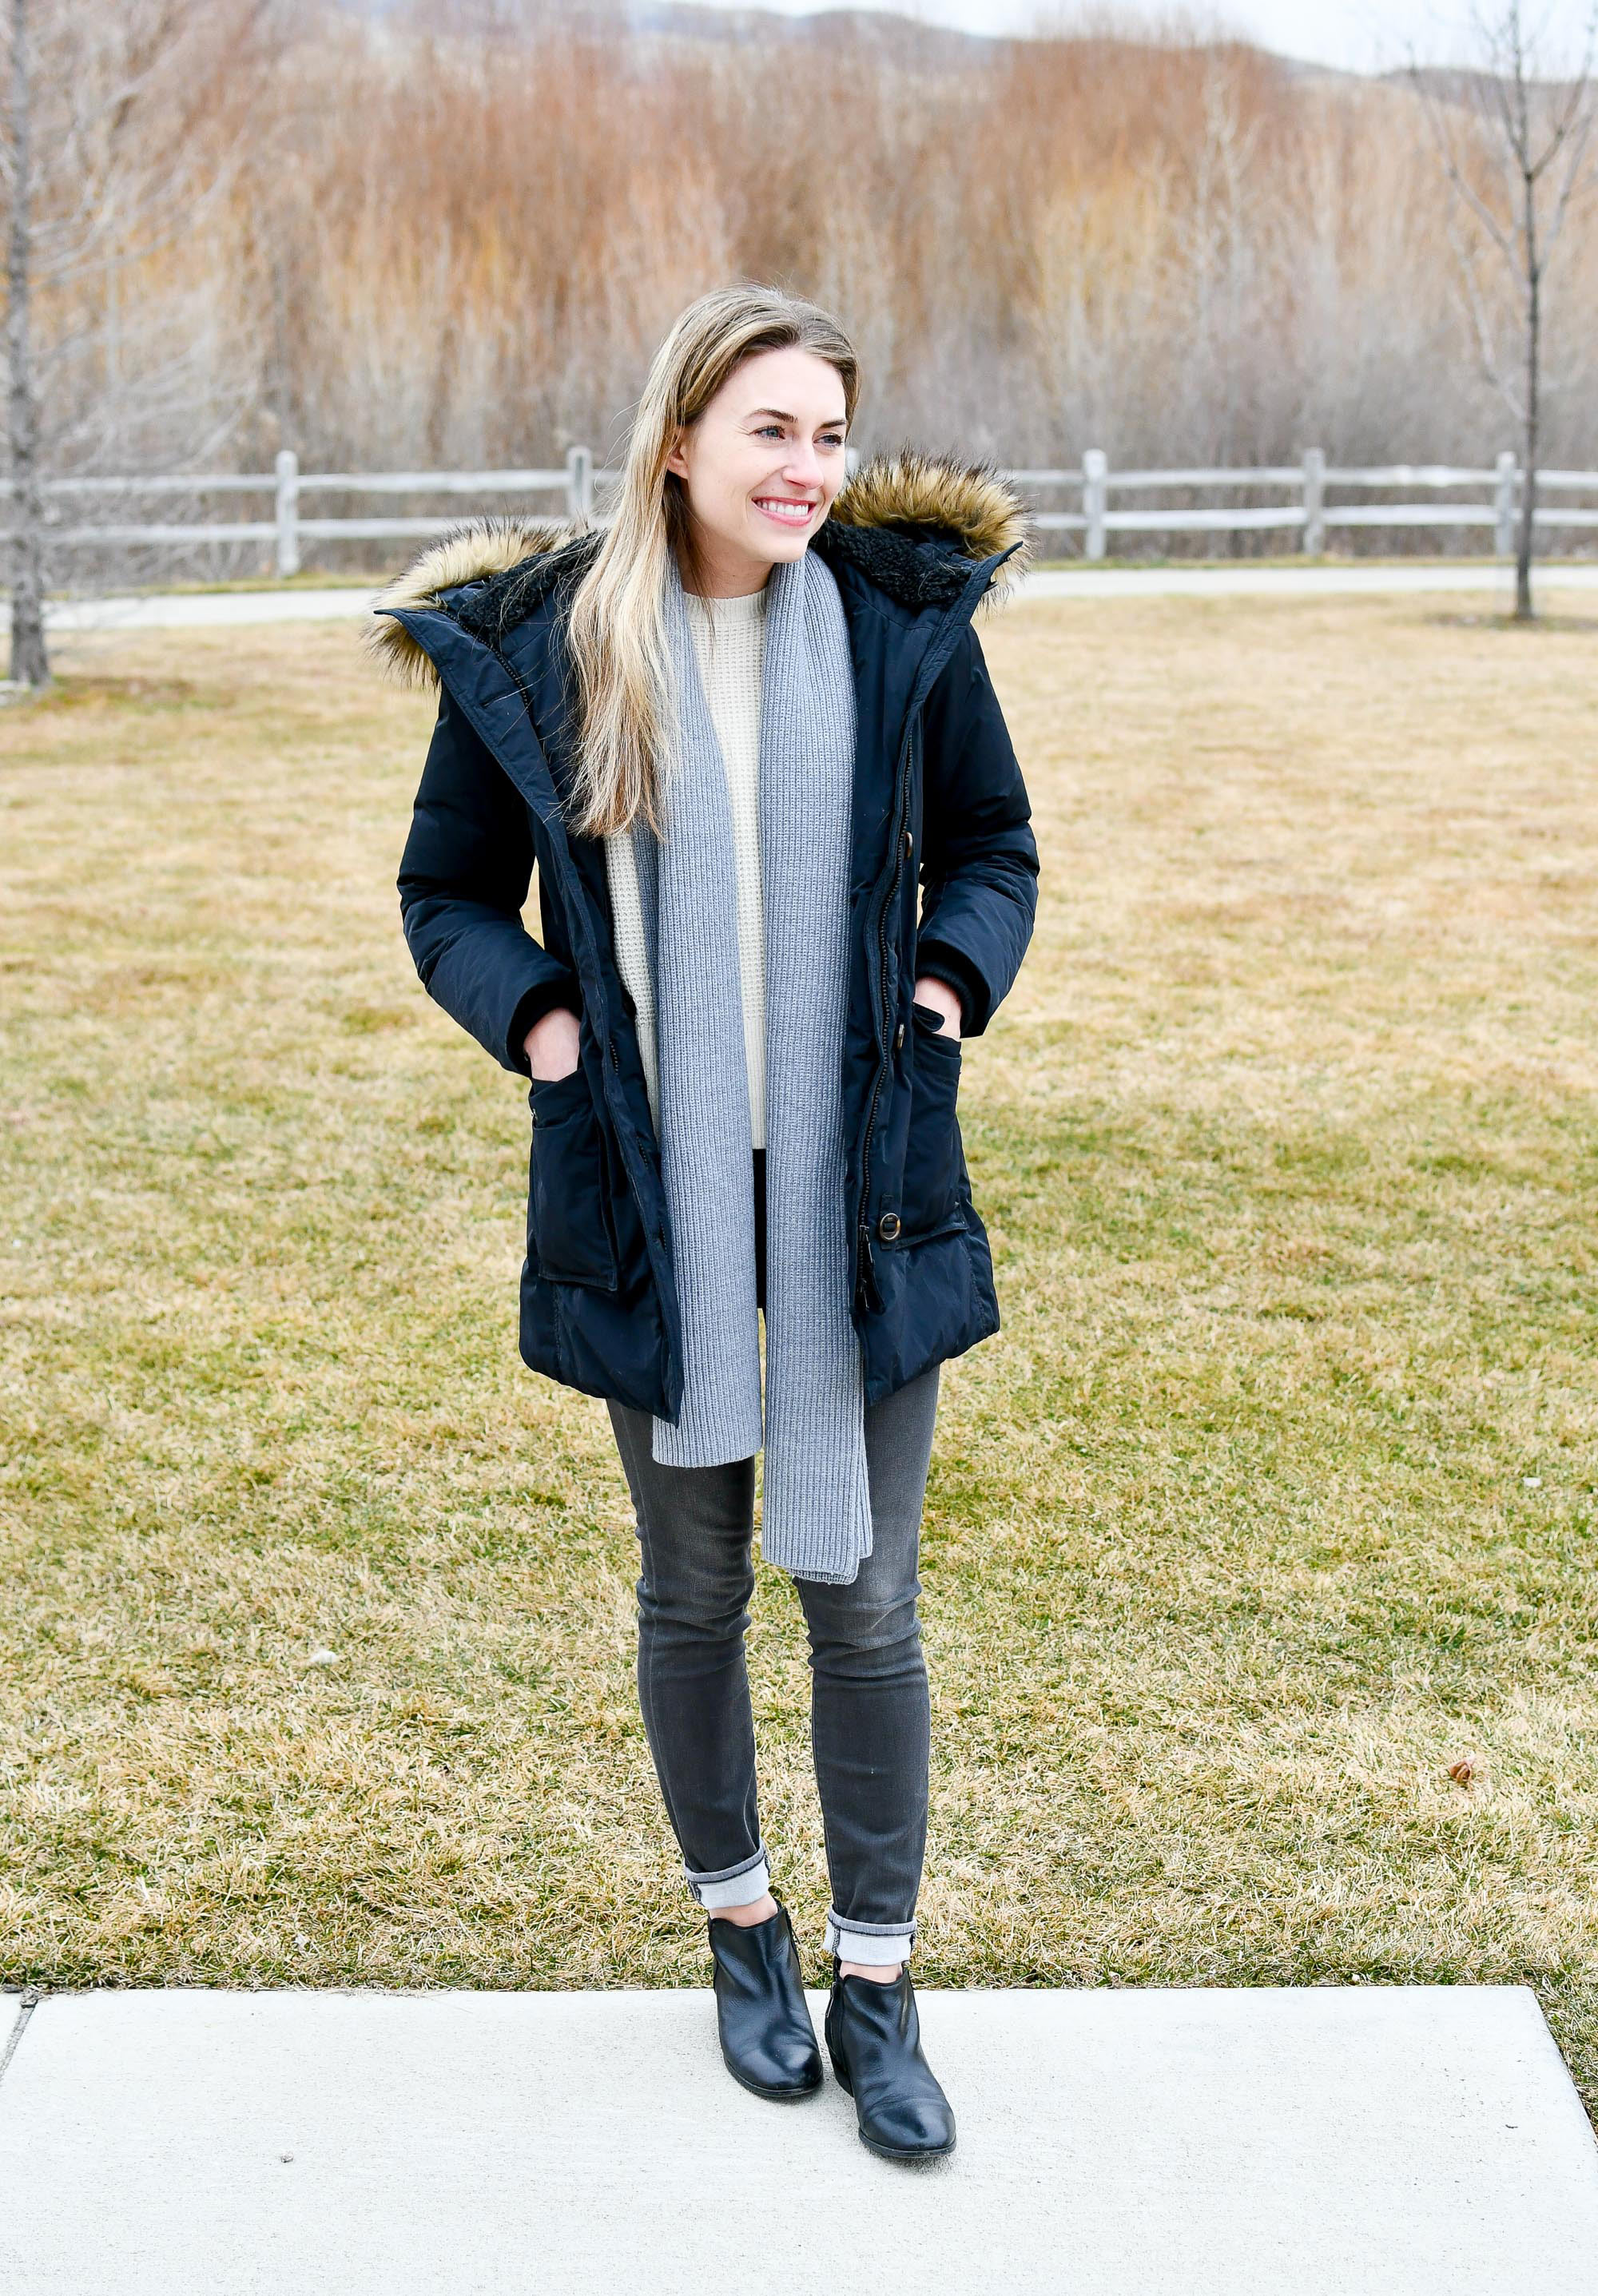 Winter Style – Lizzy's Latest